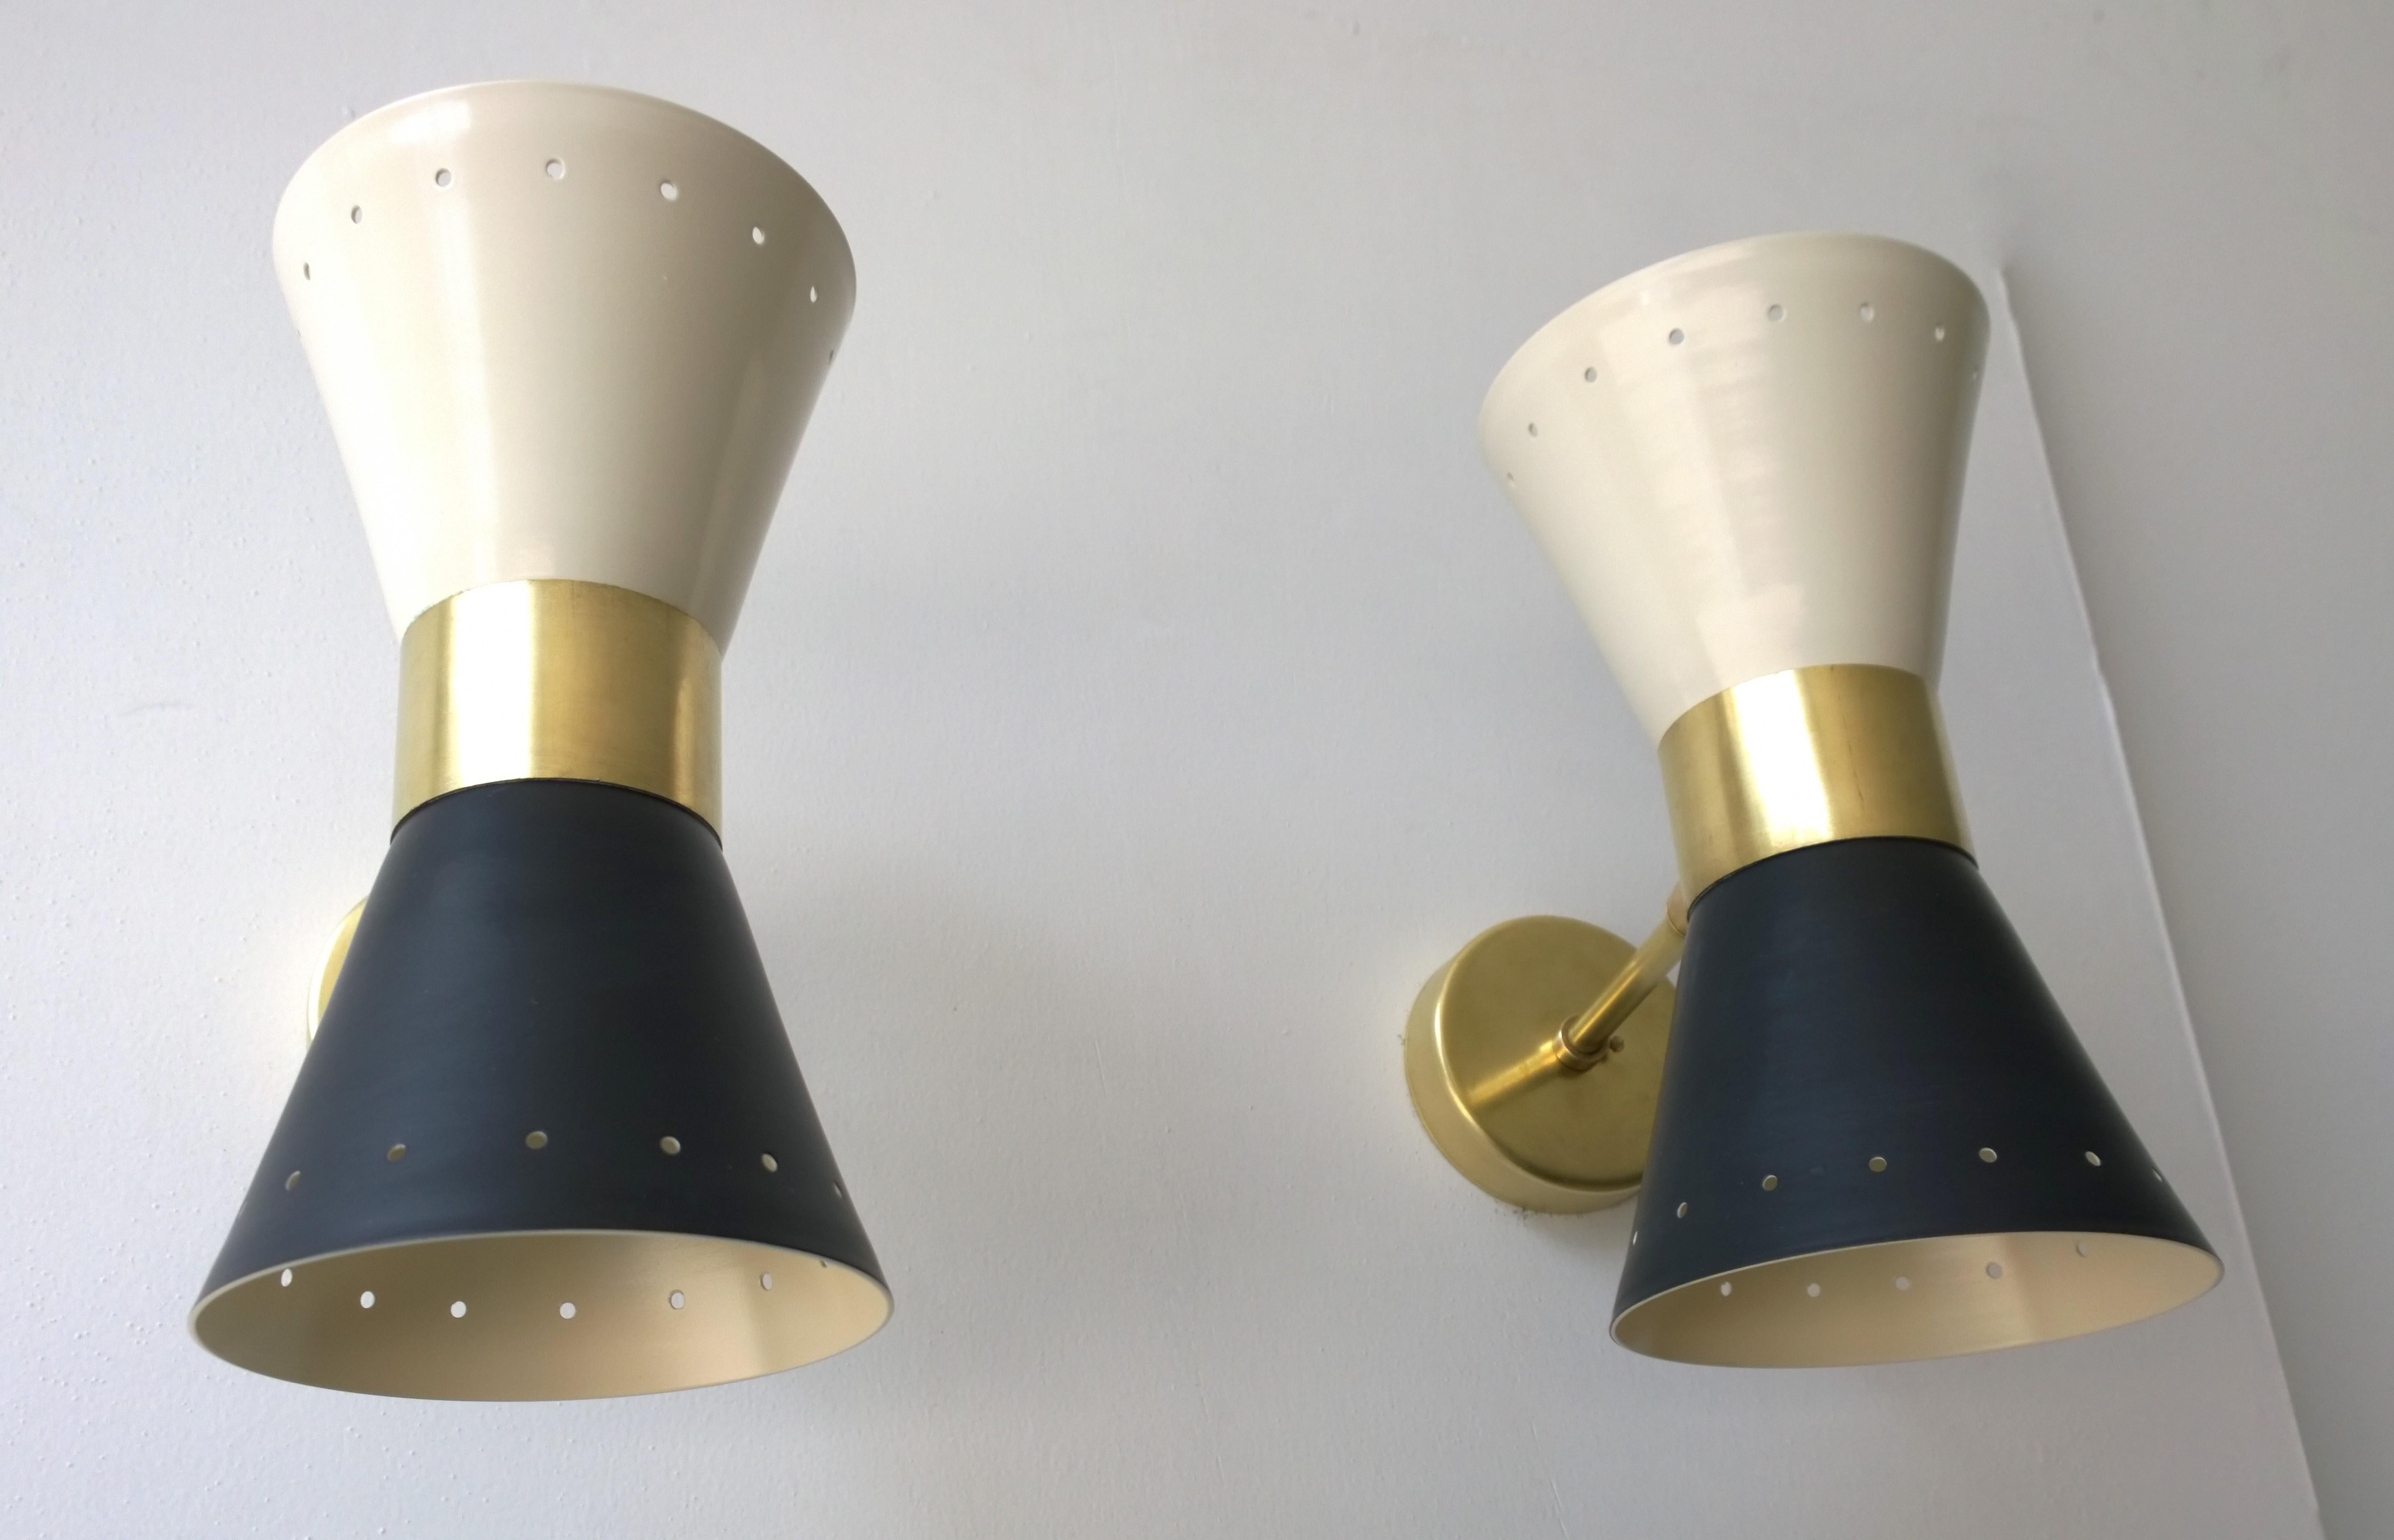 Black & White Newly Enameled Brass Double Cone Sconces with Brass Accents, Pair For Sale 3